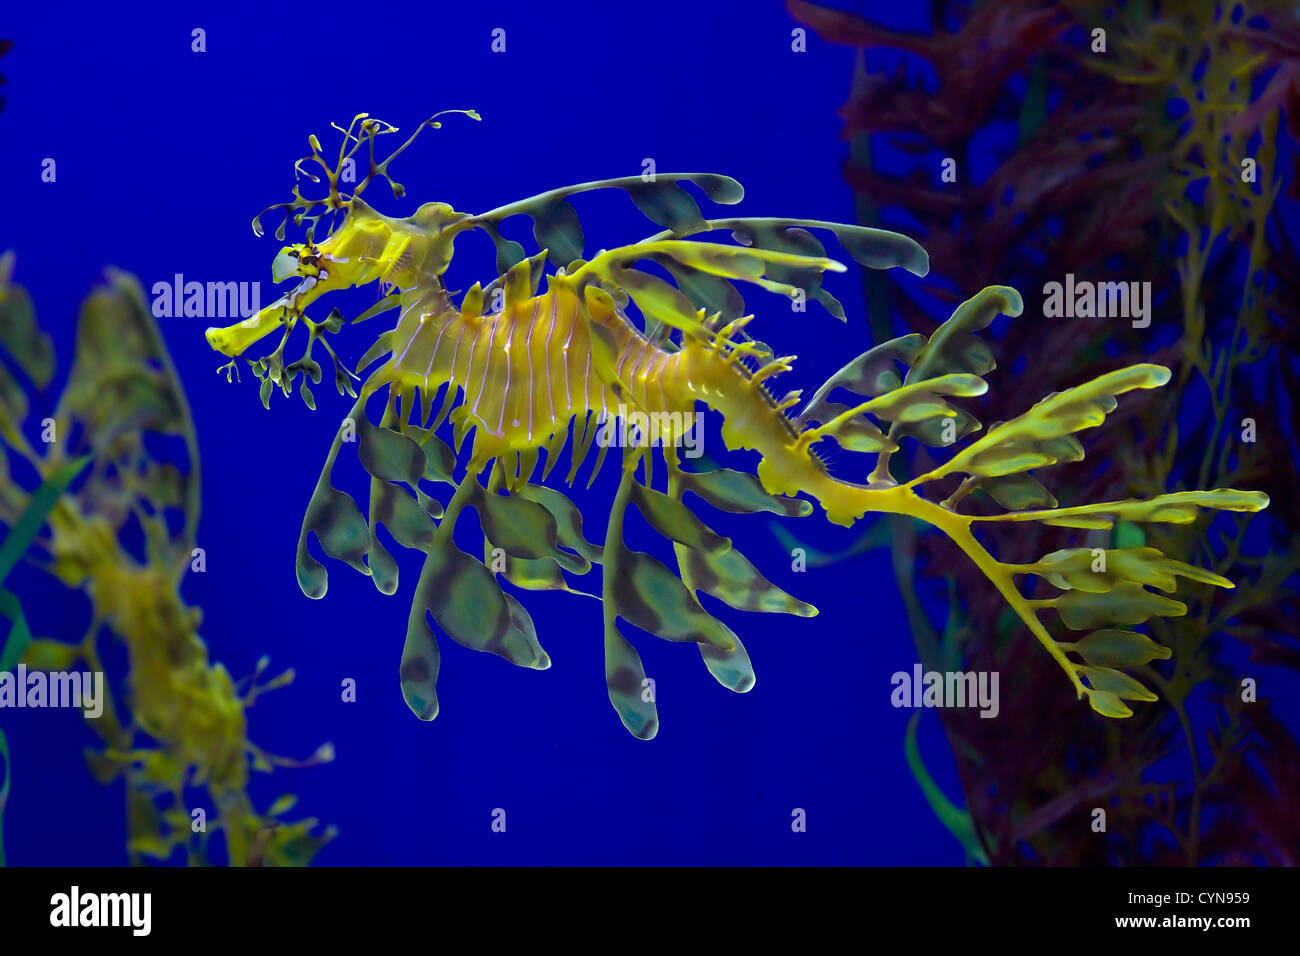 Leafy sea dragon photographed in Indonesia, 2009 Stock Photo